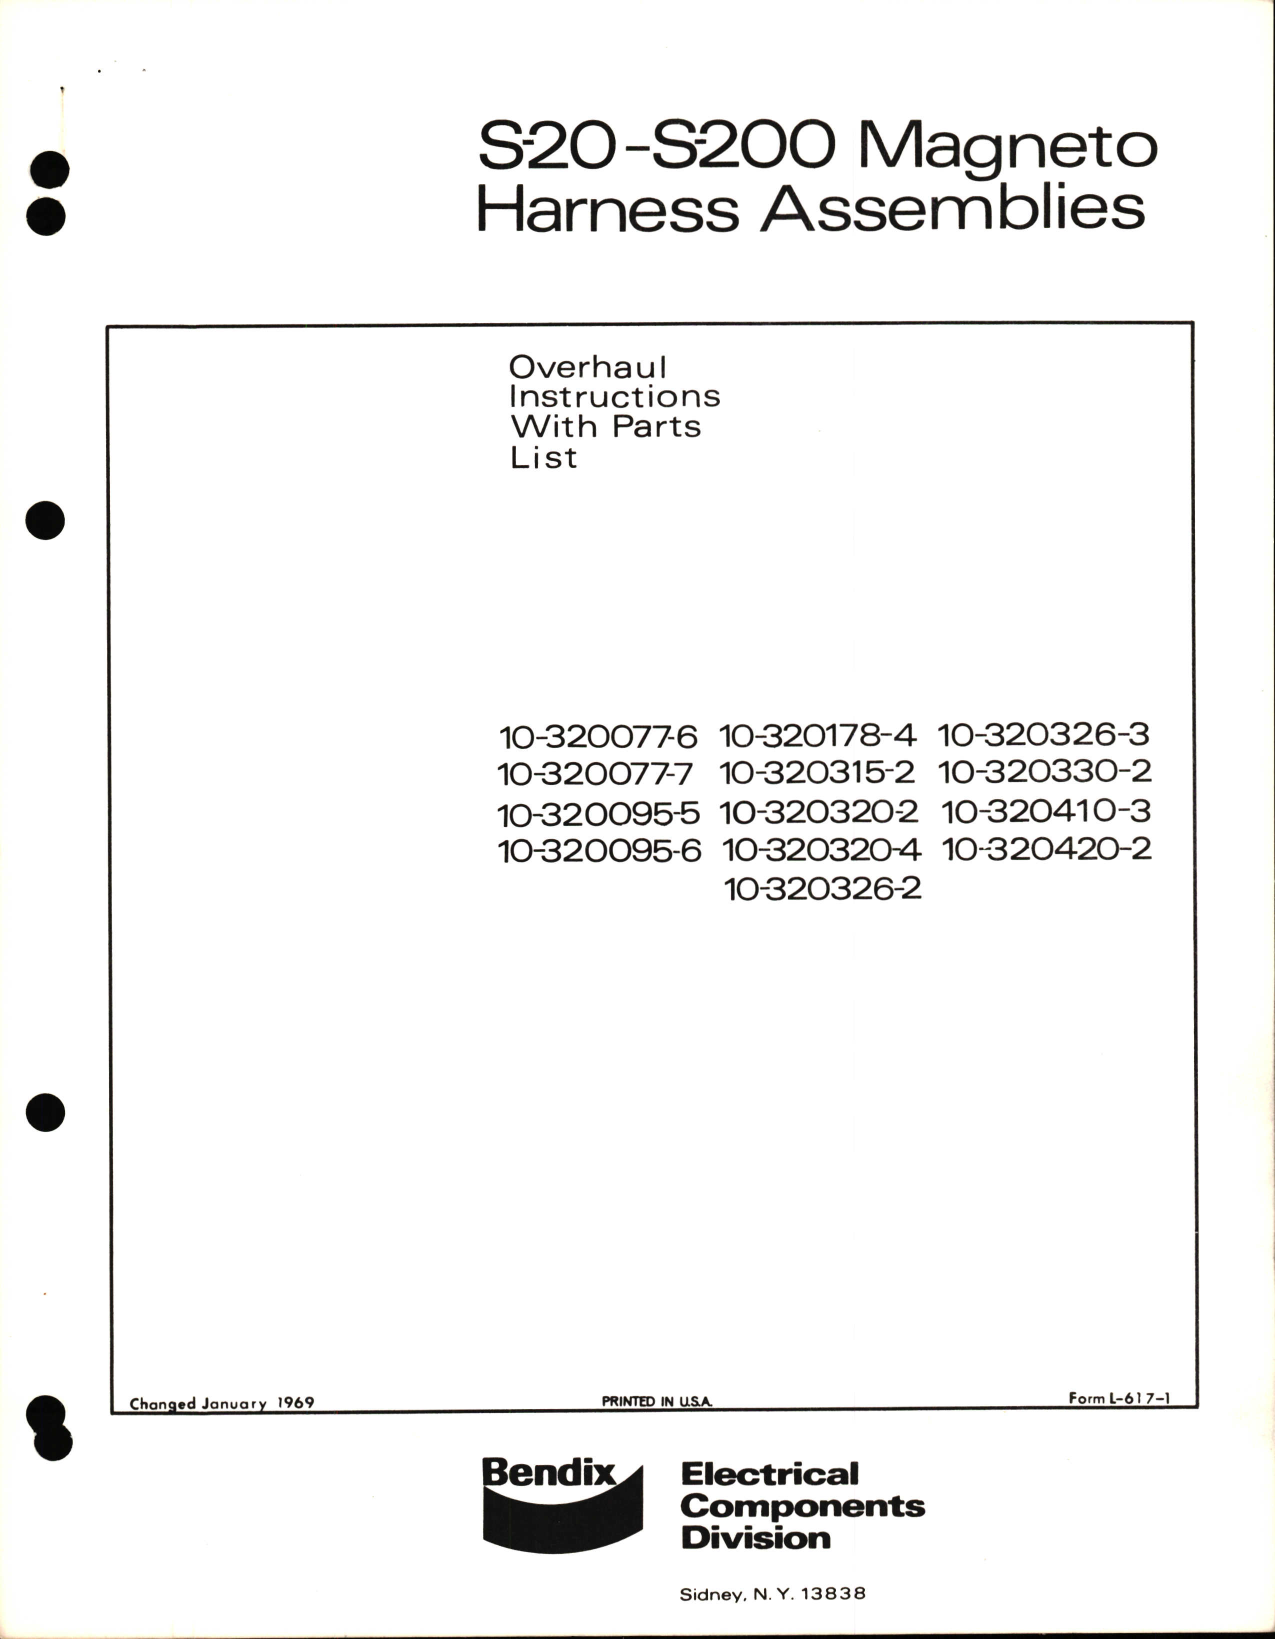 Sample page 1 from AirCorps Library document: Overhaul Instructions with Parts List for S-20 and S-200 Magneto Harness Assemblies